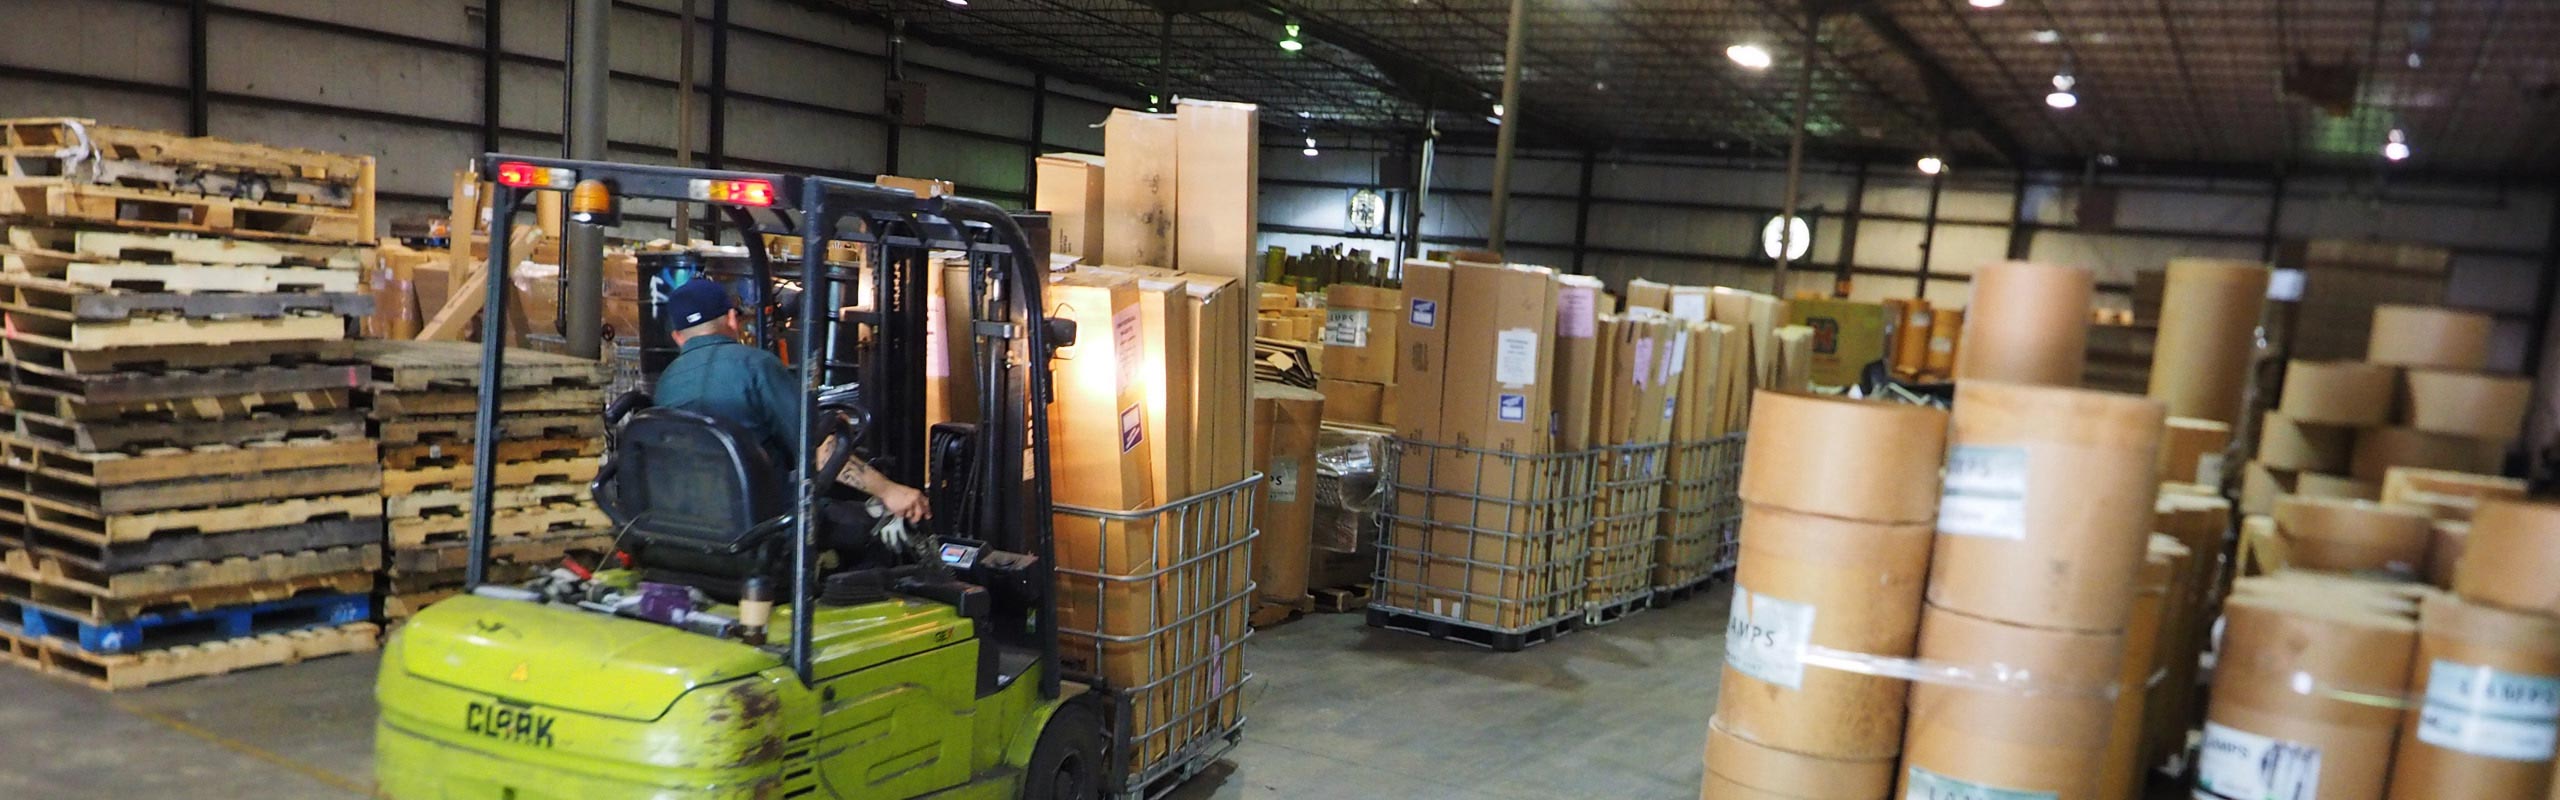 A picture of forklift moving a cage full of fluorescent lamps in the warehouse. NLR recycles fluorescent lamps.